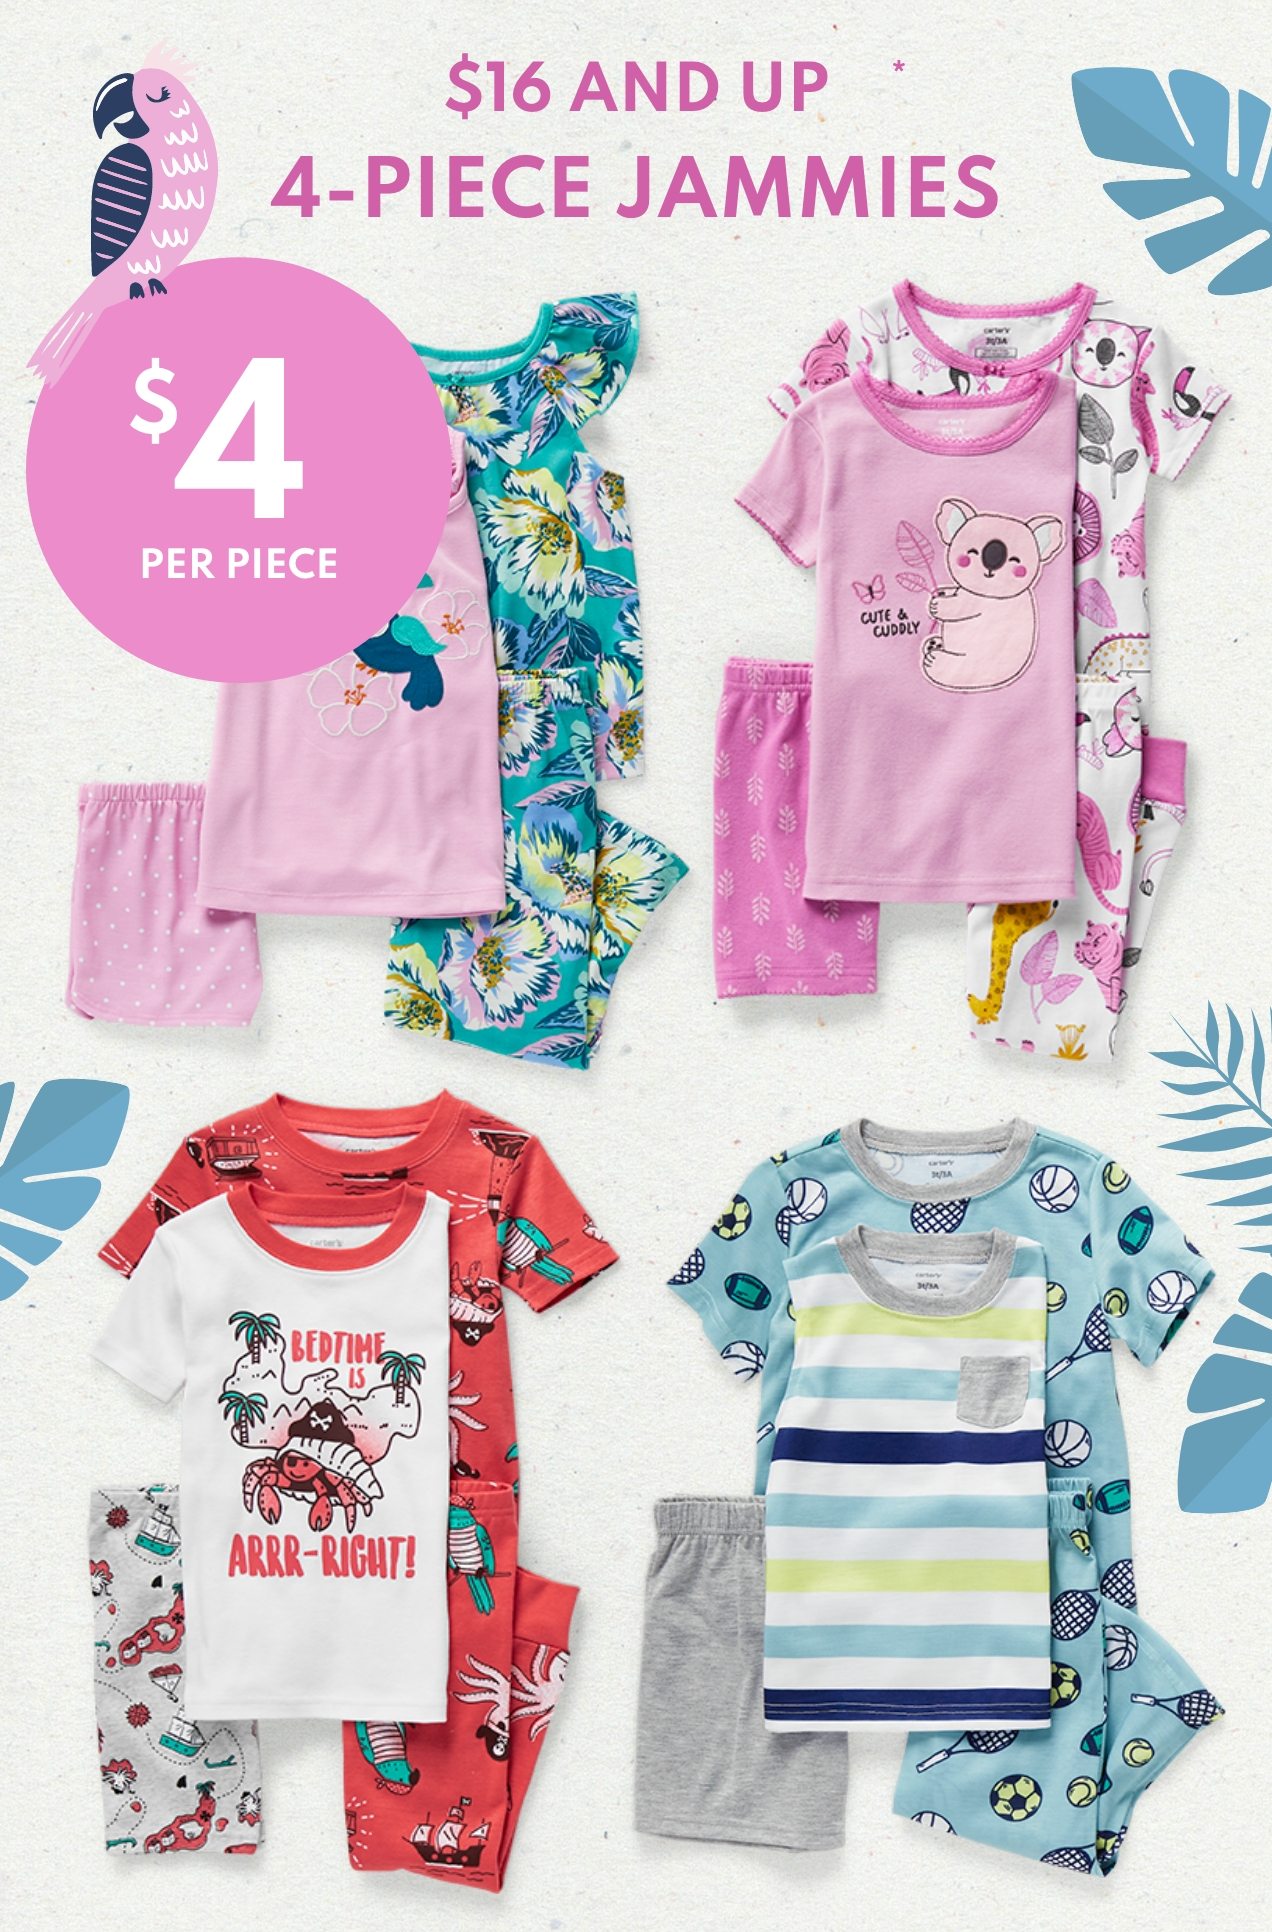 $16 AND UP | 4- PIECE JAMMIES | $4 | PER PIECE